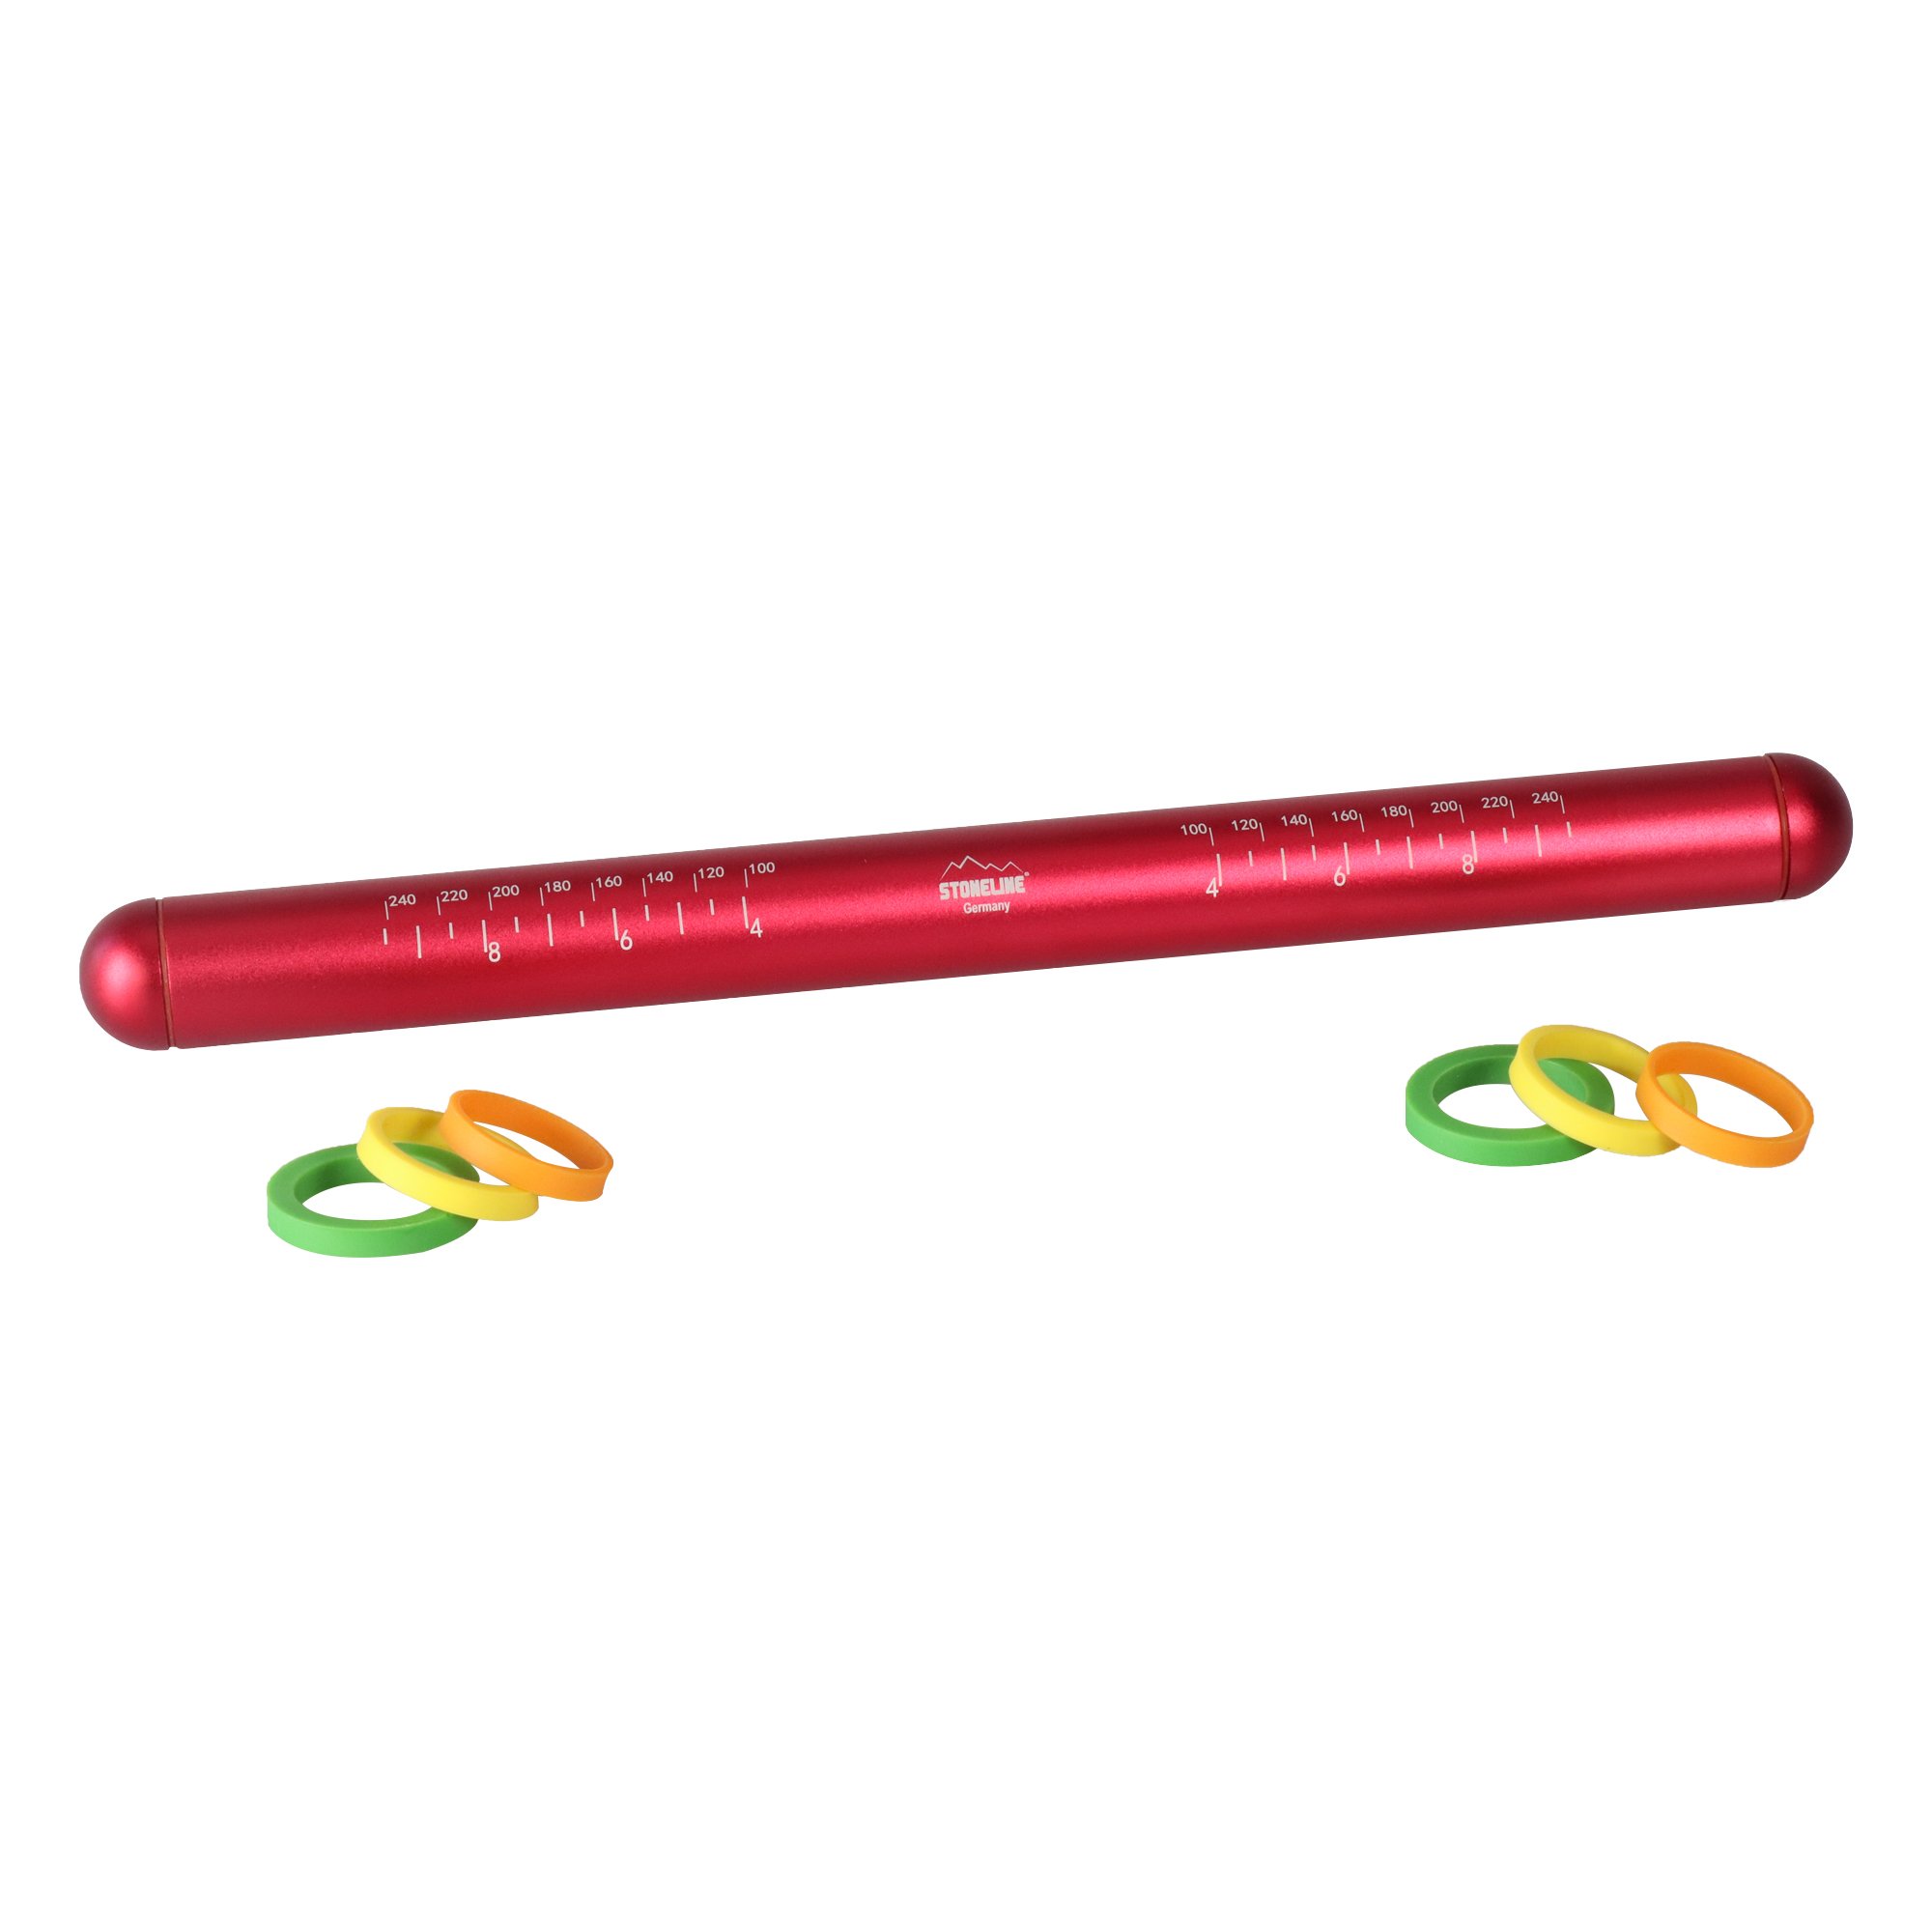 STONELINE® Dough roller with 3 removable spacers, red